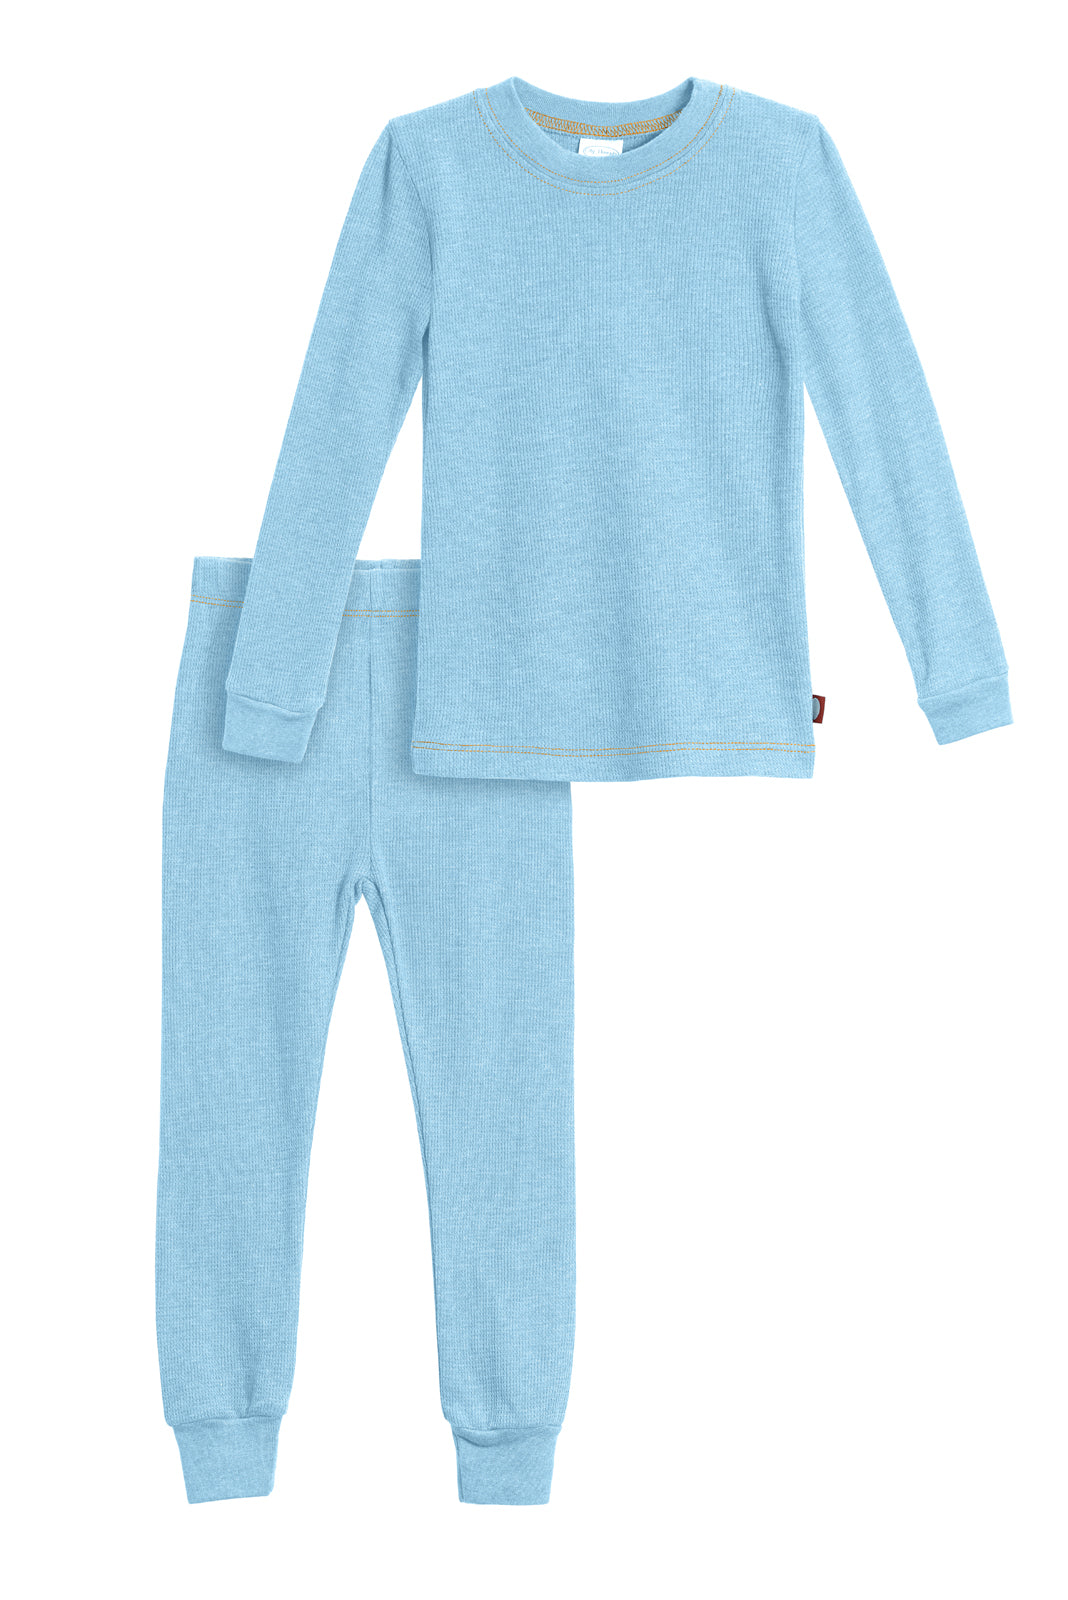 Boy's Printed Thermal Sets: Free Shipping (US) Returns & Exchanges